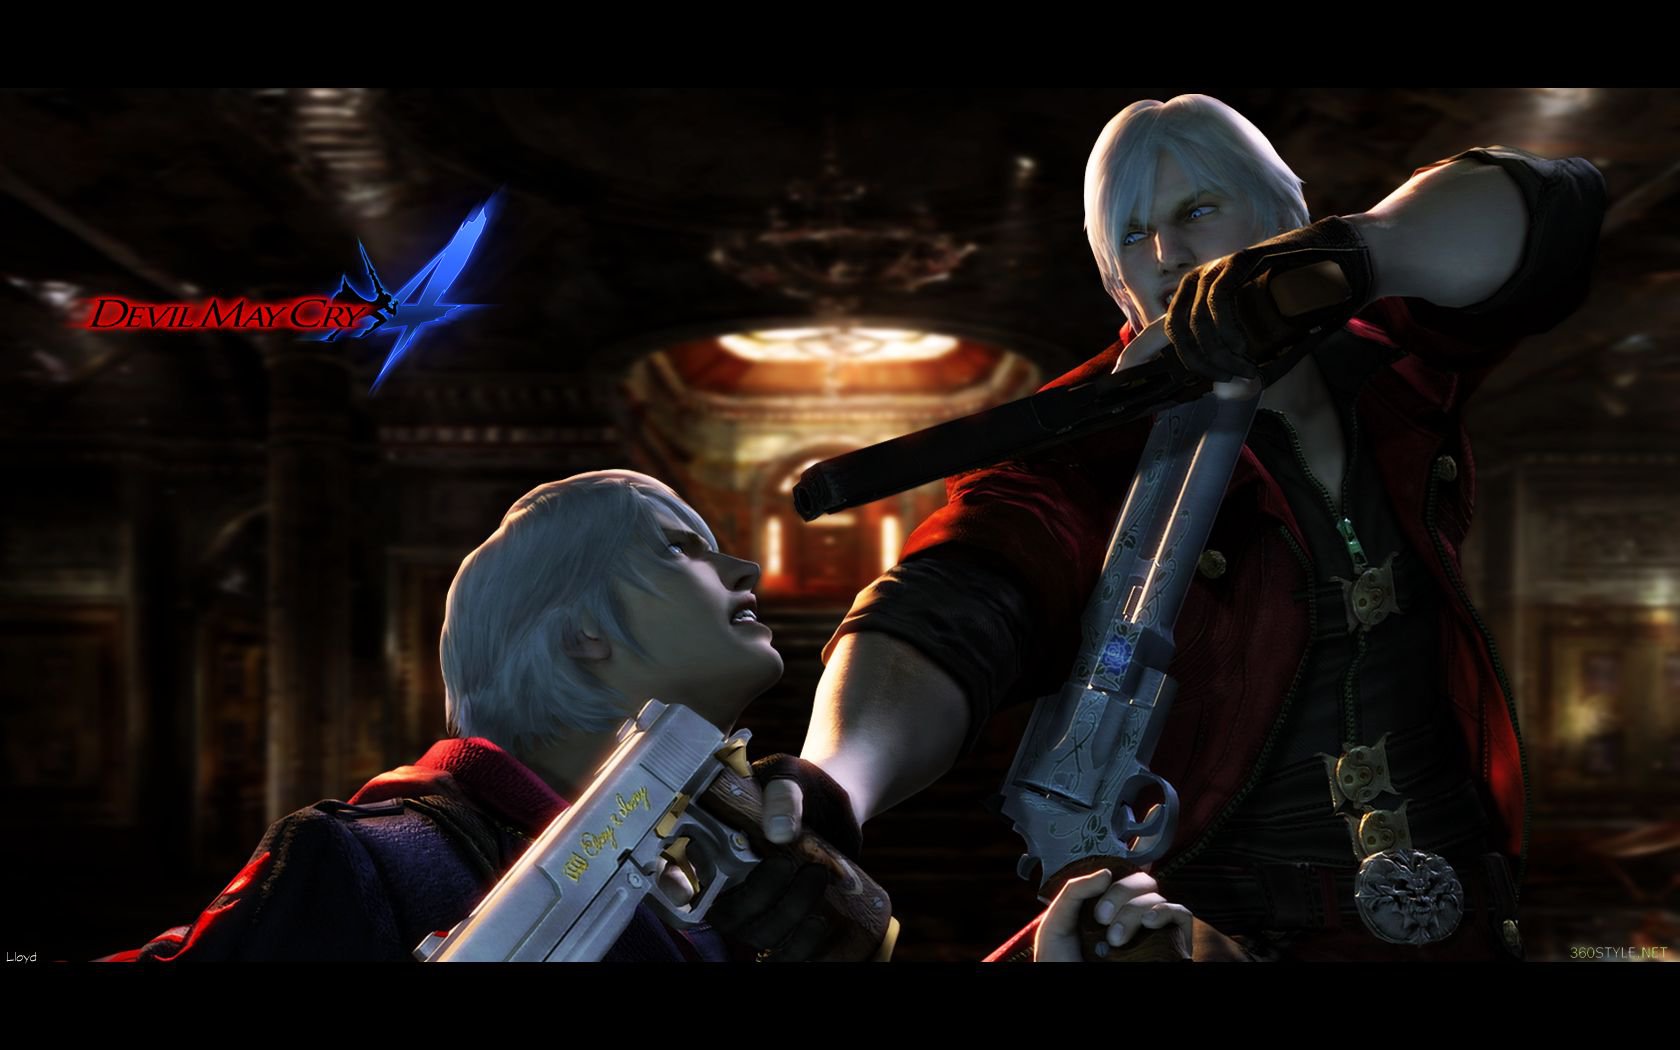 Devil May Cry 4 Wallpaper 2 by igotgame1075